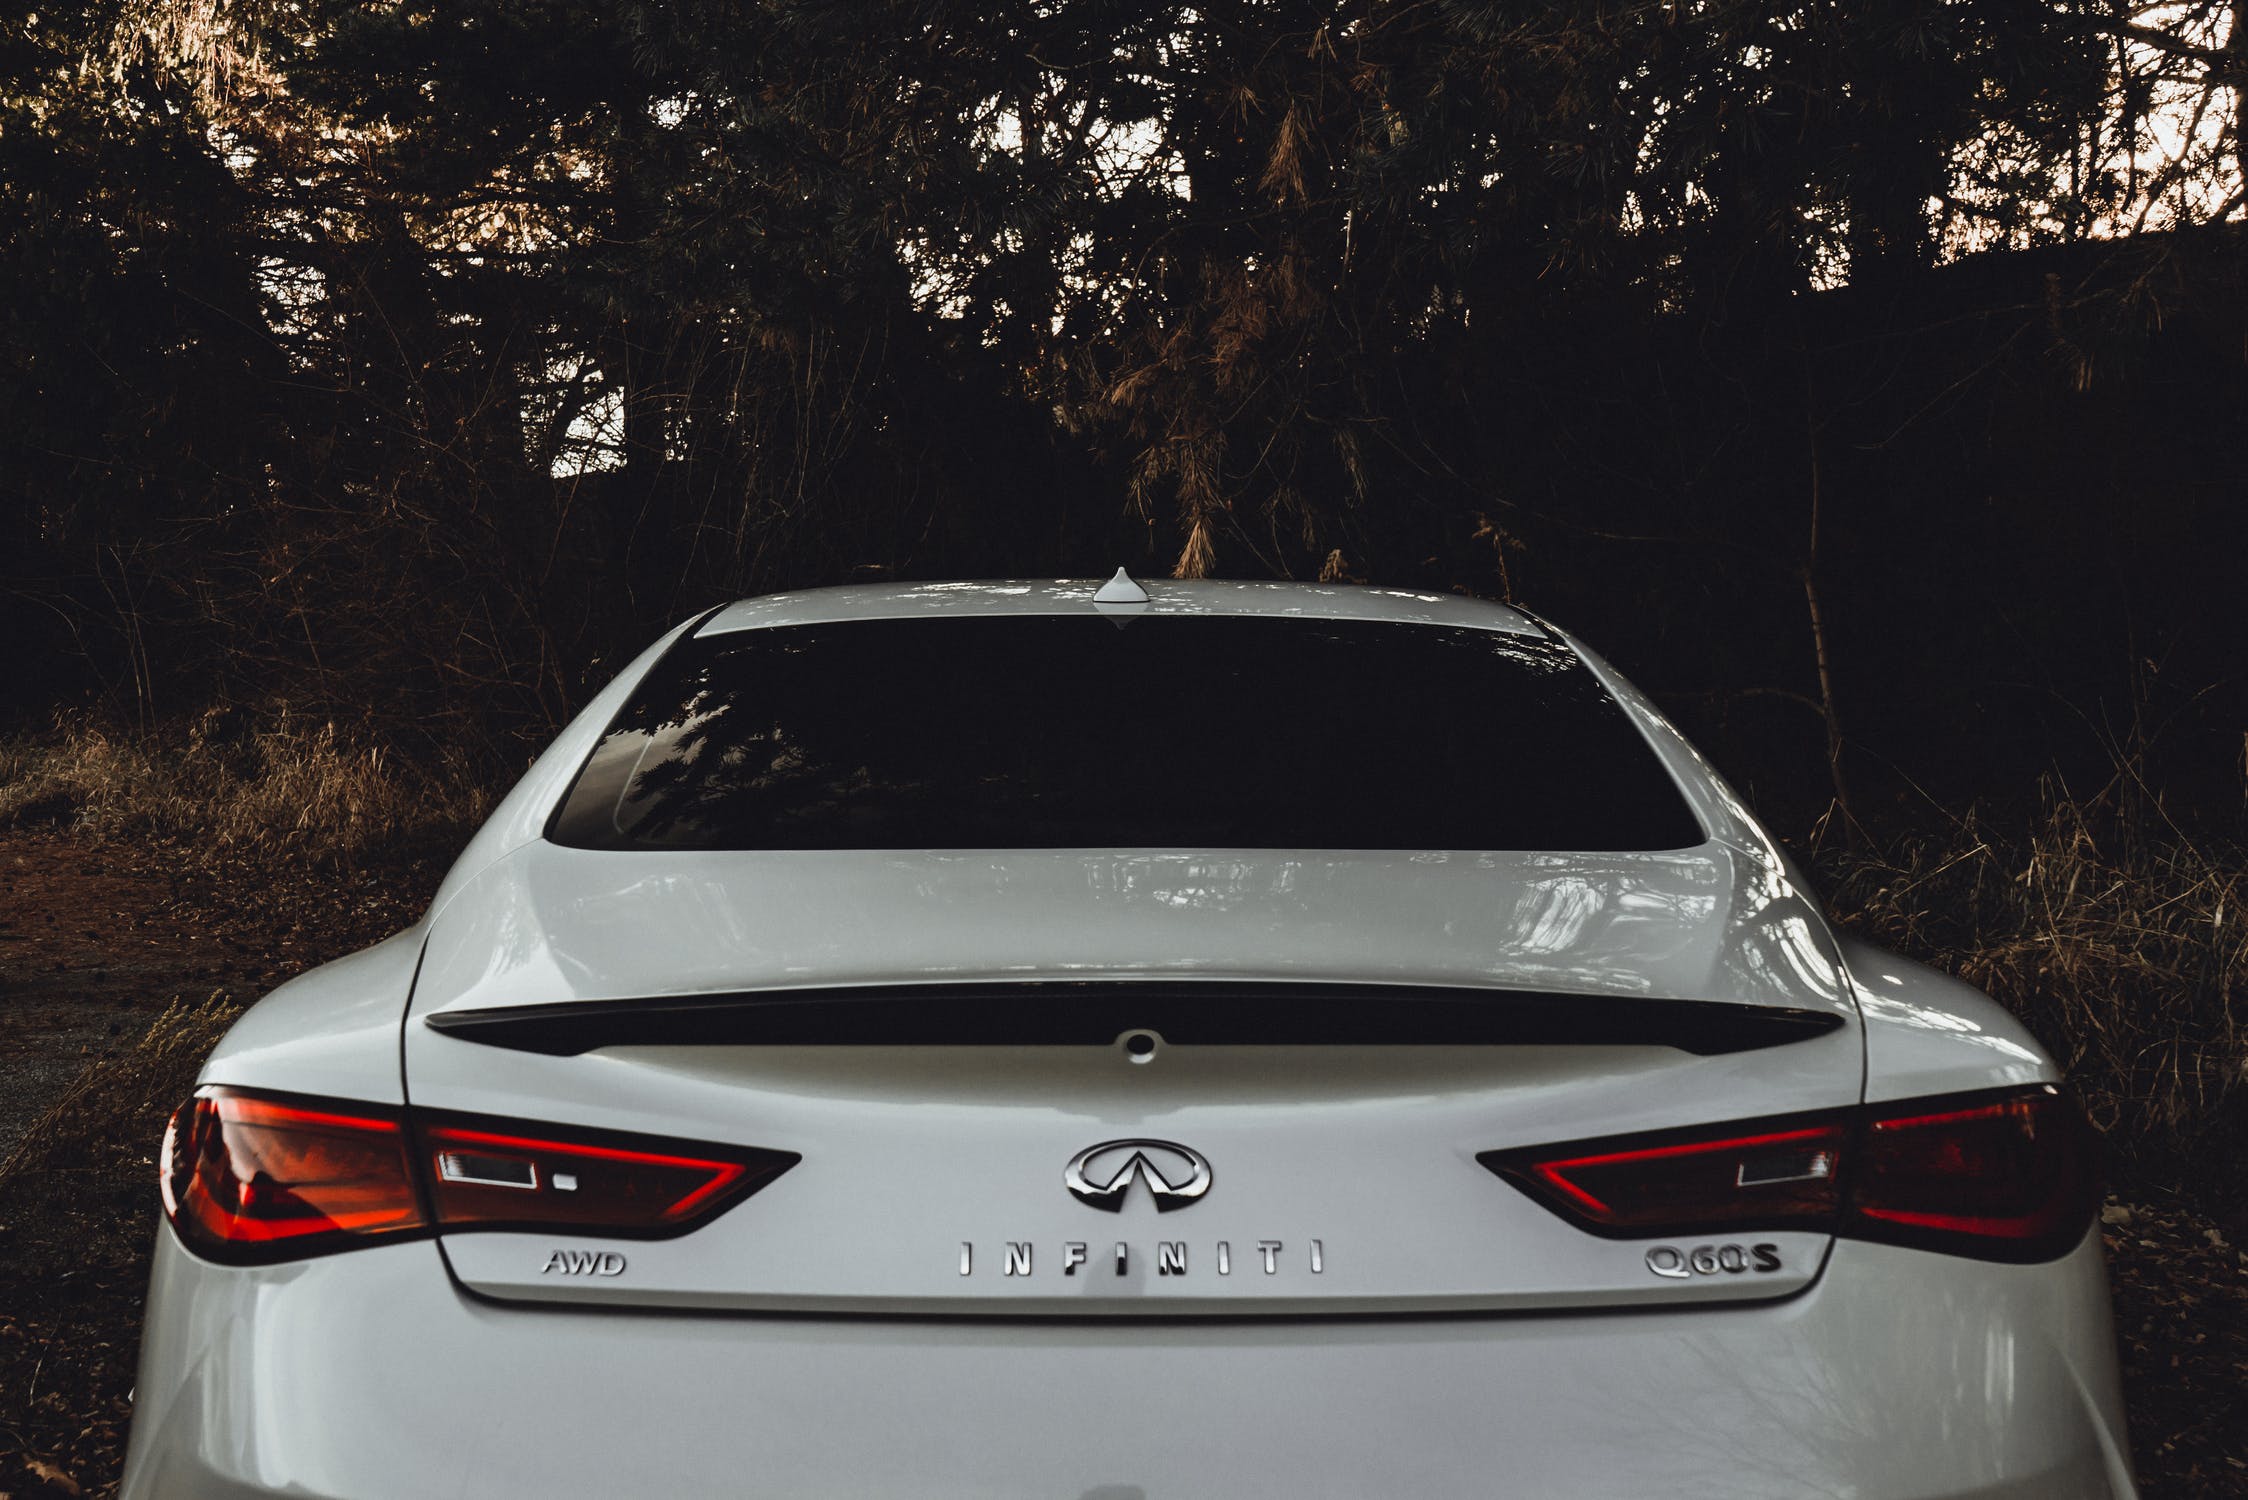 The back of a white Infiniti vehicle